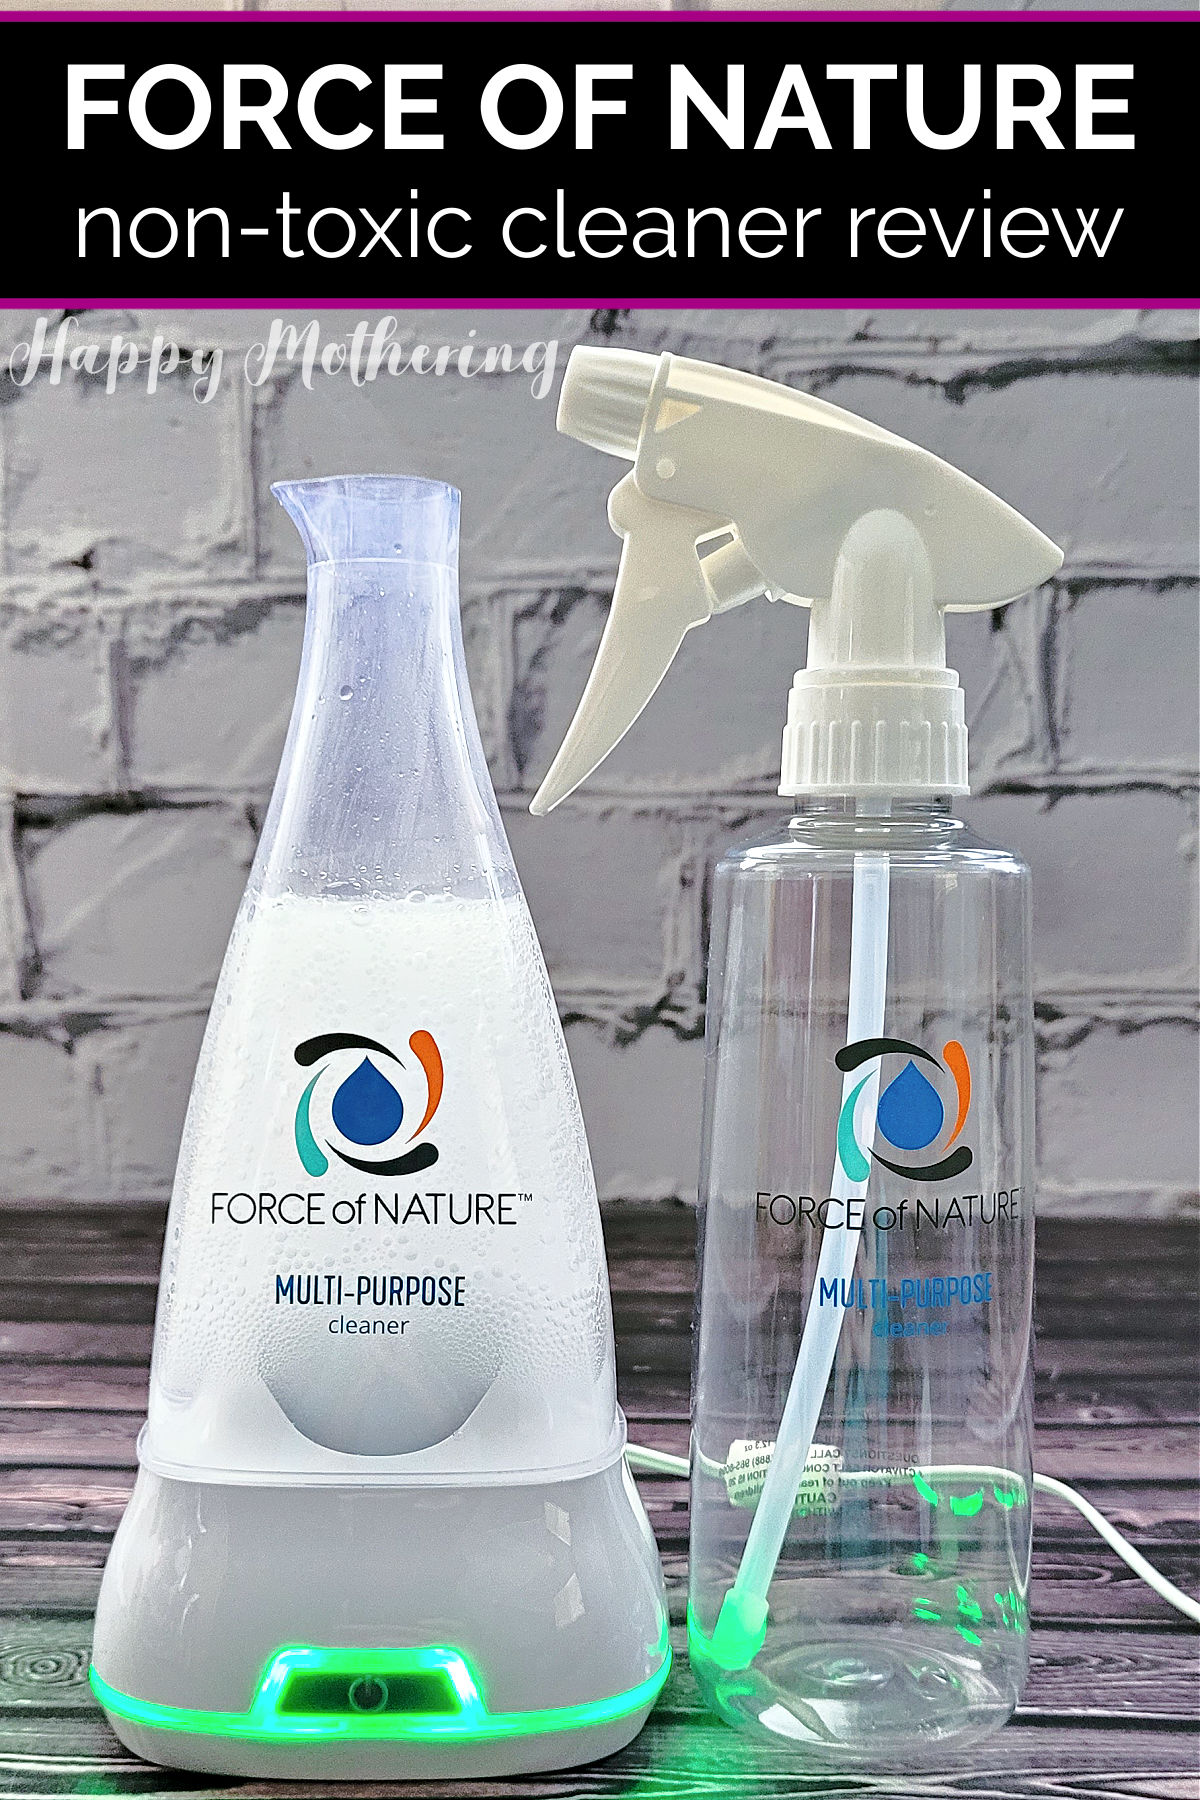 Force of Nature appliance making cleaner with empty spray bottle next to it.